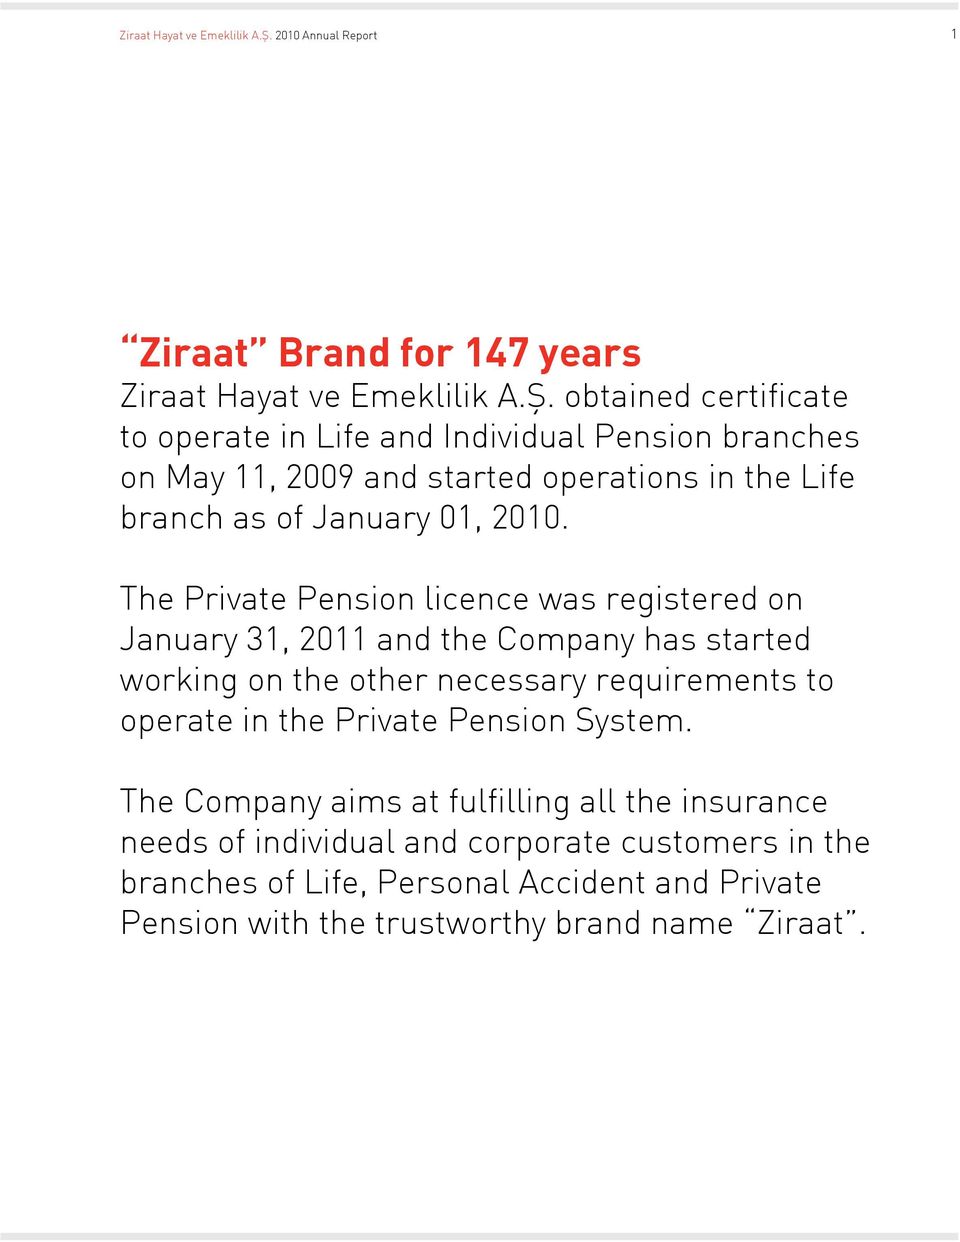 The Private Pension licence was registered on January 31, 2011 and the Company has started working on the other necessary requirements to